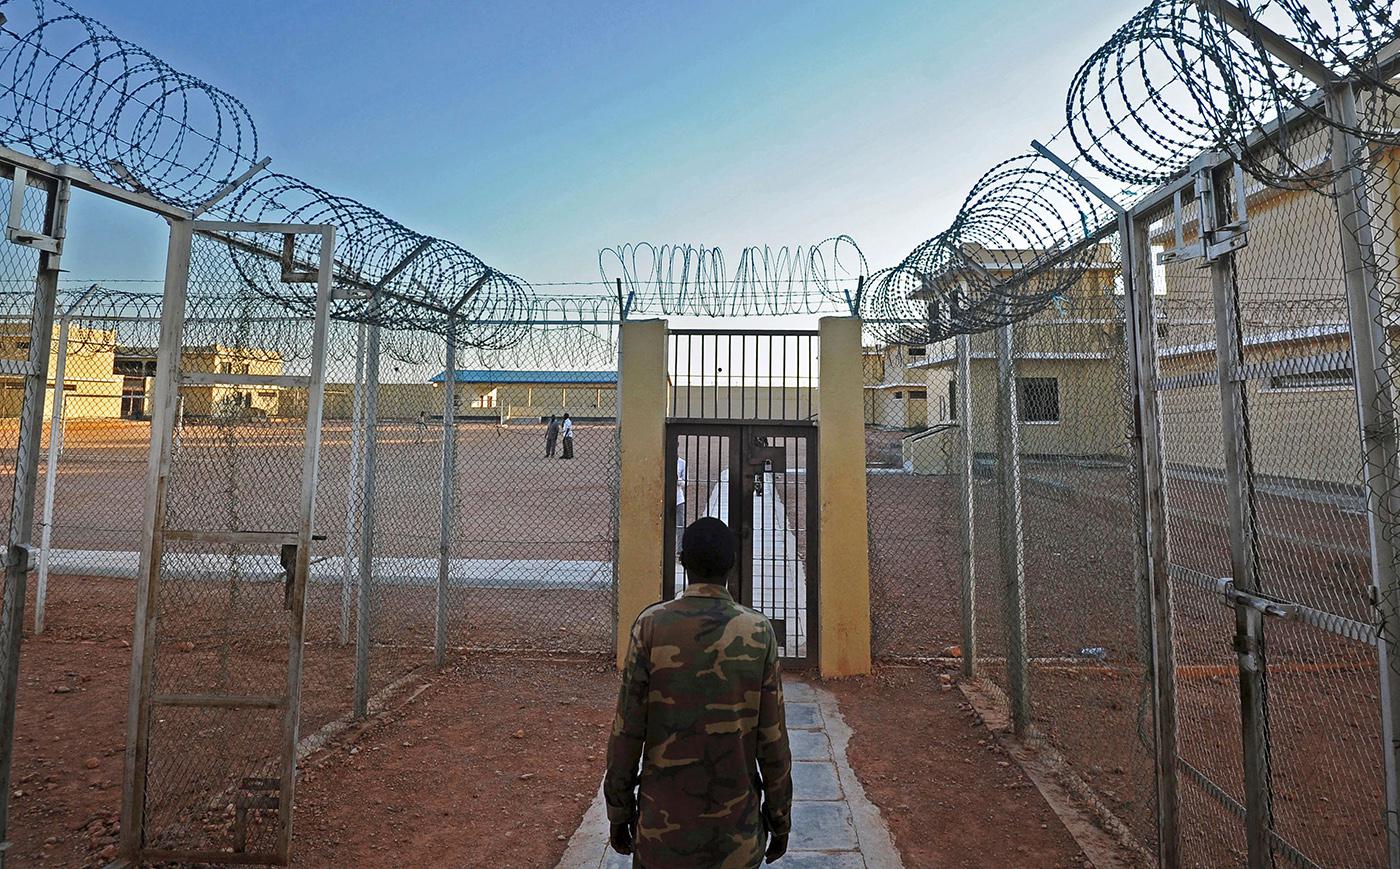 A prison warden at a prison in Garowe, Puntland state, in northeastern Somalia, December 2016. Fifty-four boys, some as young as 12, sent to fight by Al-Shabab in Puntland, spent months in this facility far from their homes. A military court sentenced 28 of the 54 boys to long prison terms, which they are now serving in a rehabilitation center in Garowe.